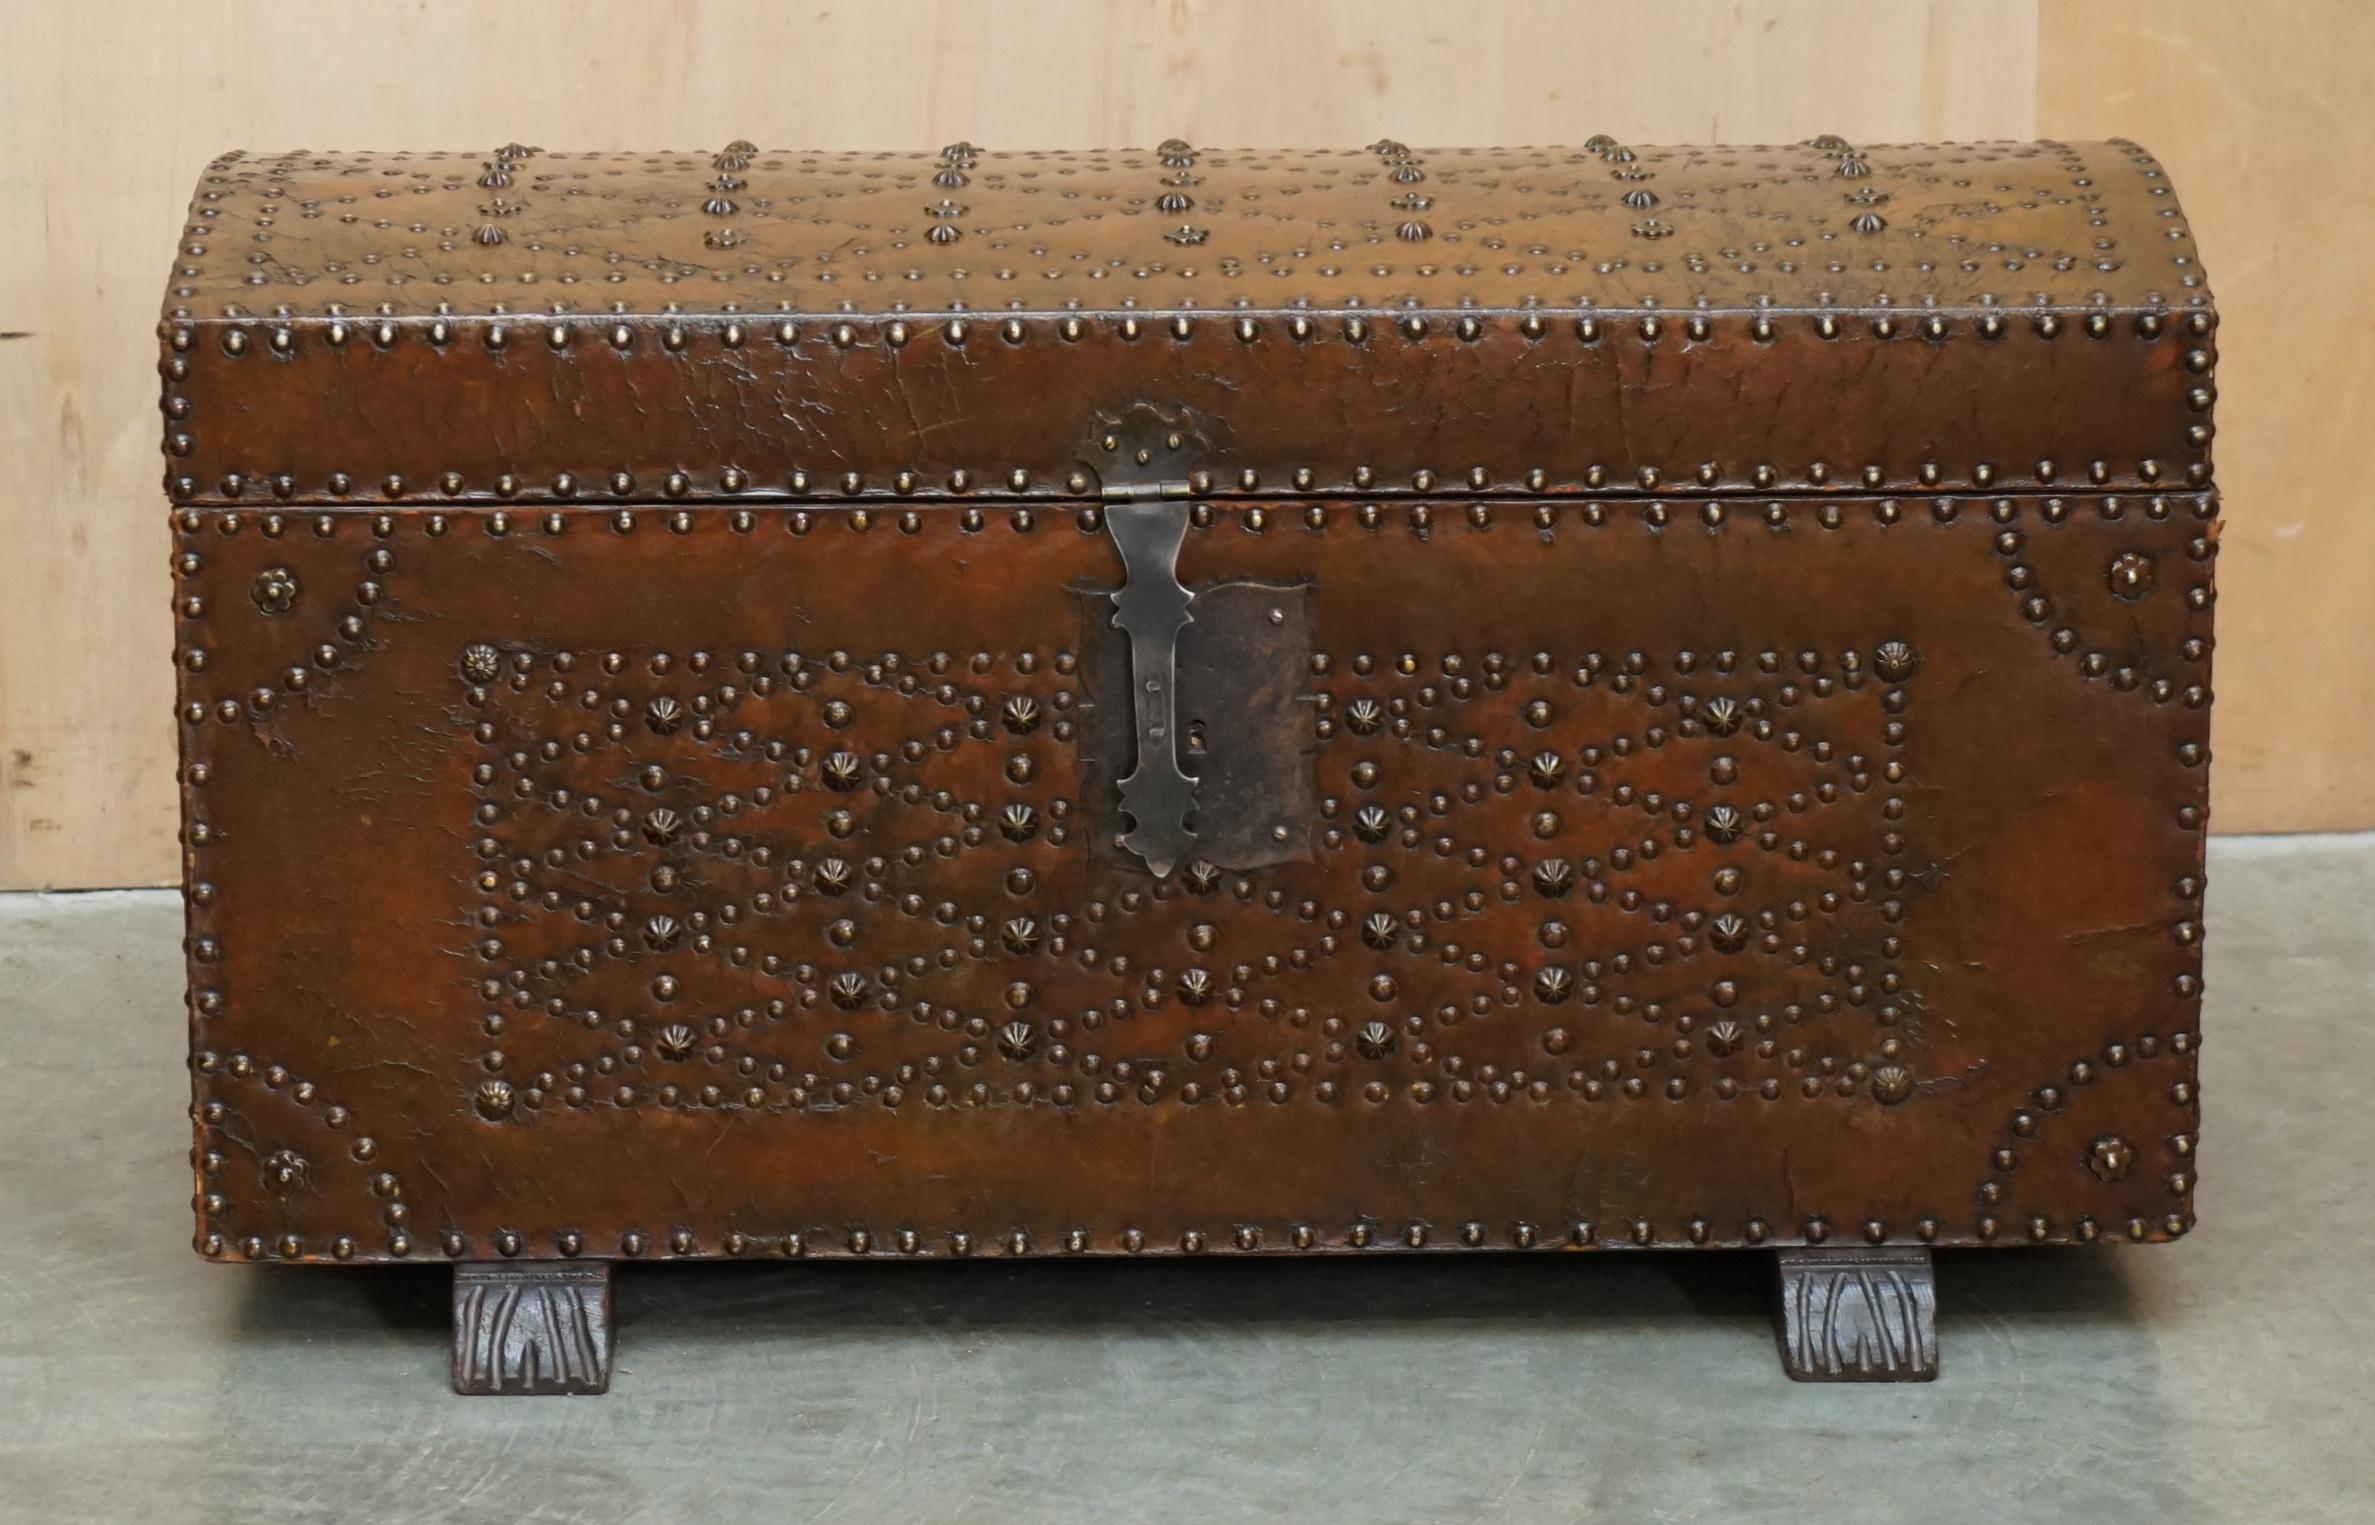 Royal House Antiques

Royal House Antiques is delighted to offer for sale this absolutely exquisite, fully restored, circa 1860-1880 hand dyed brown leather domed top steamer trunk with ornate stud work all over

Please note the delivery fee listed